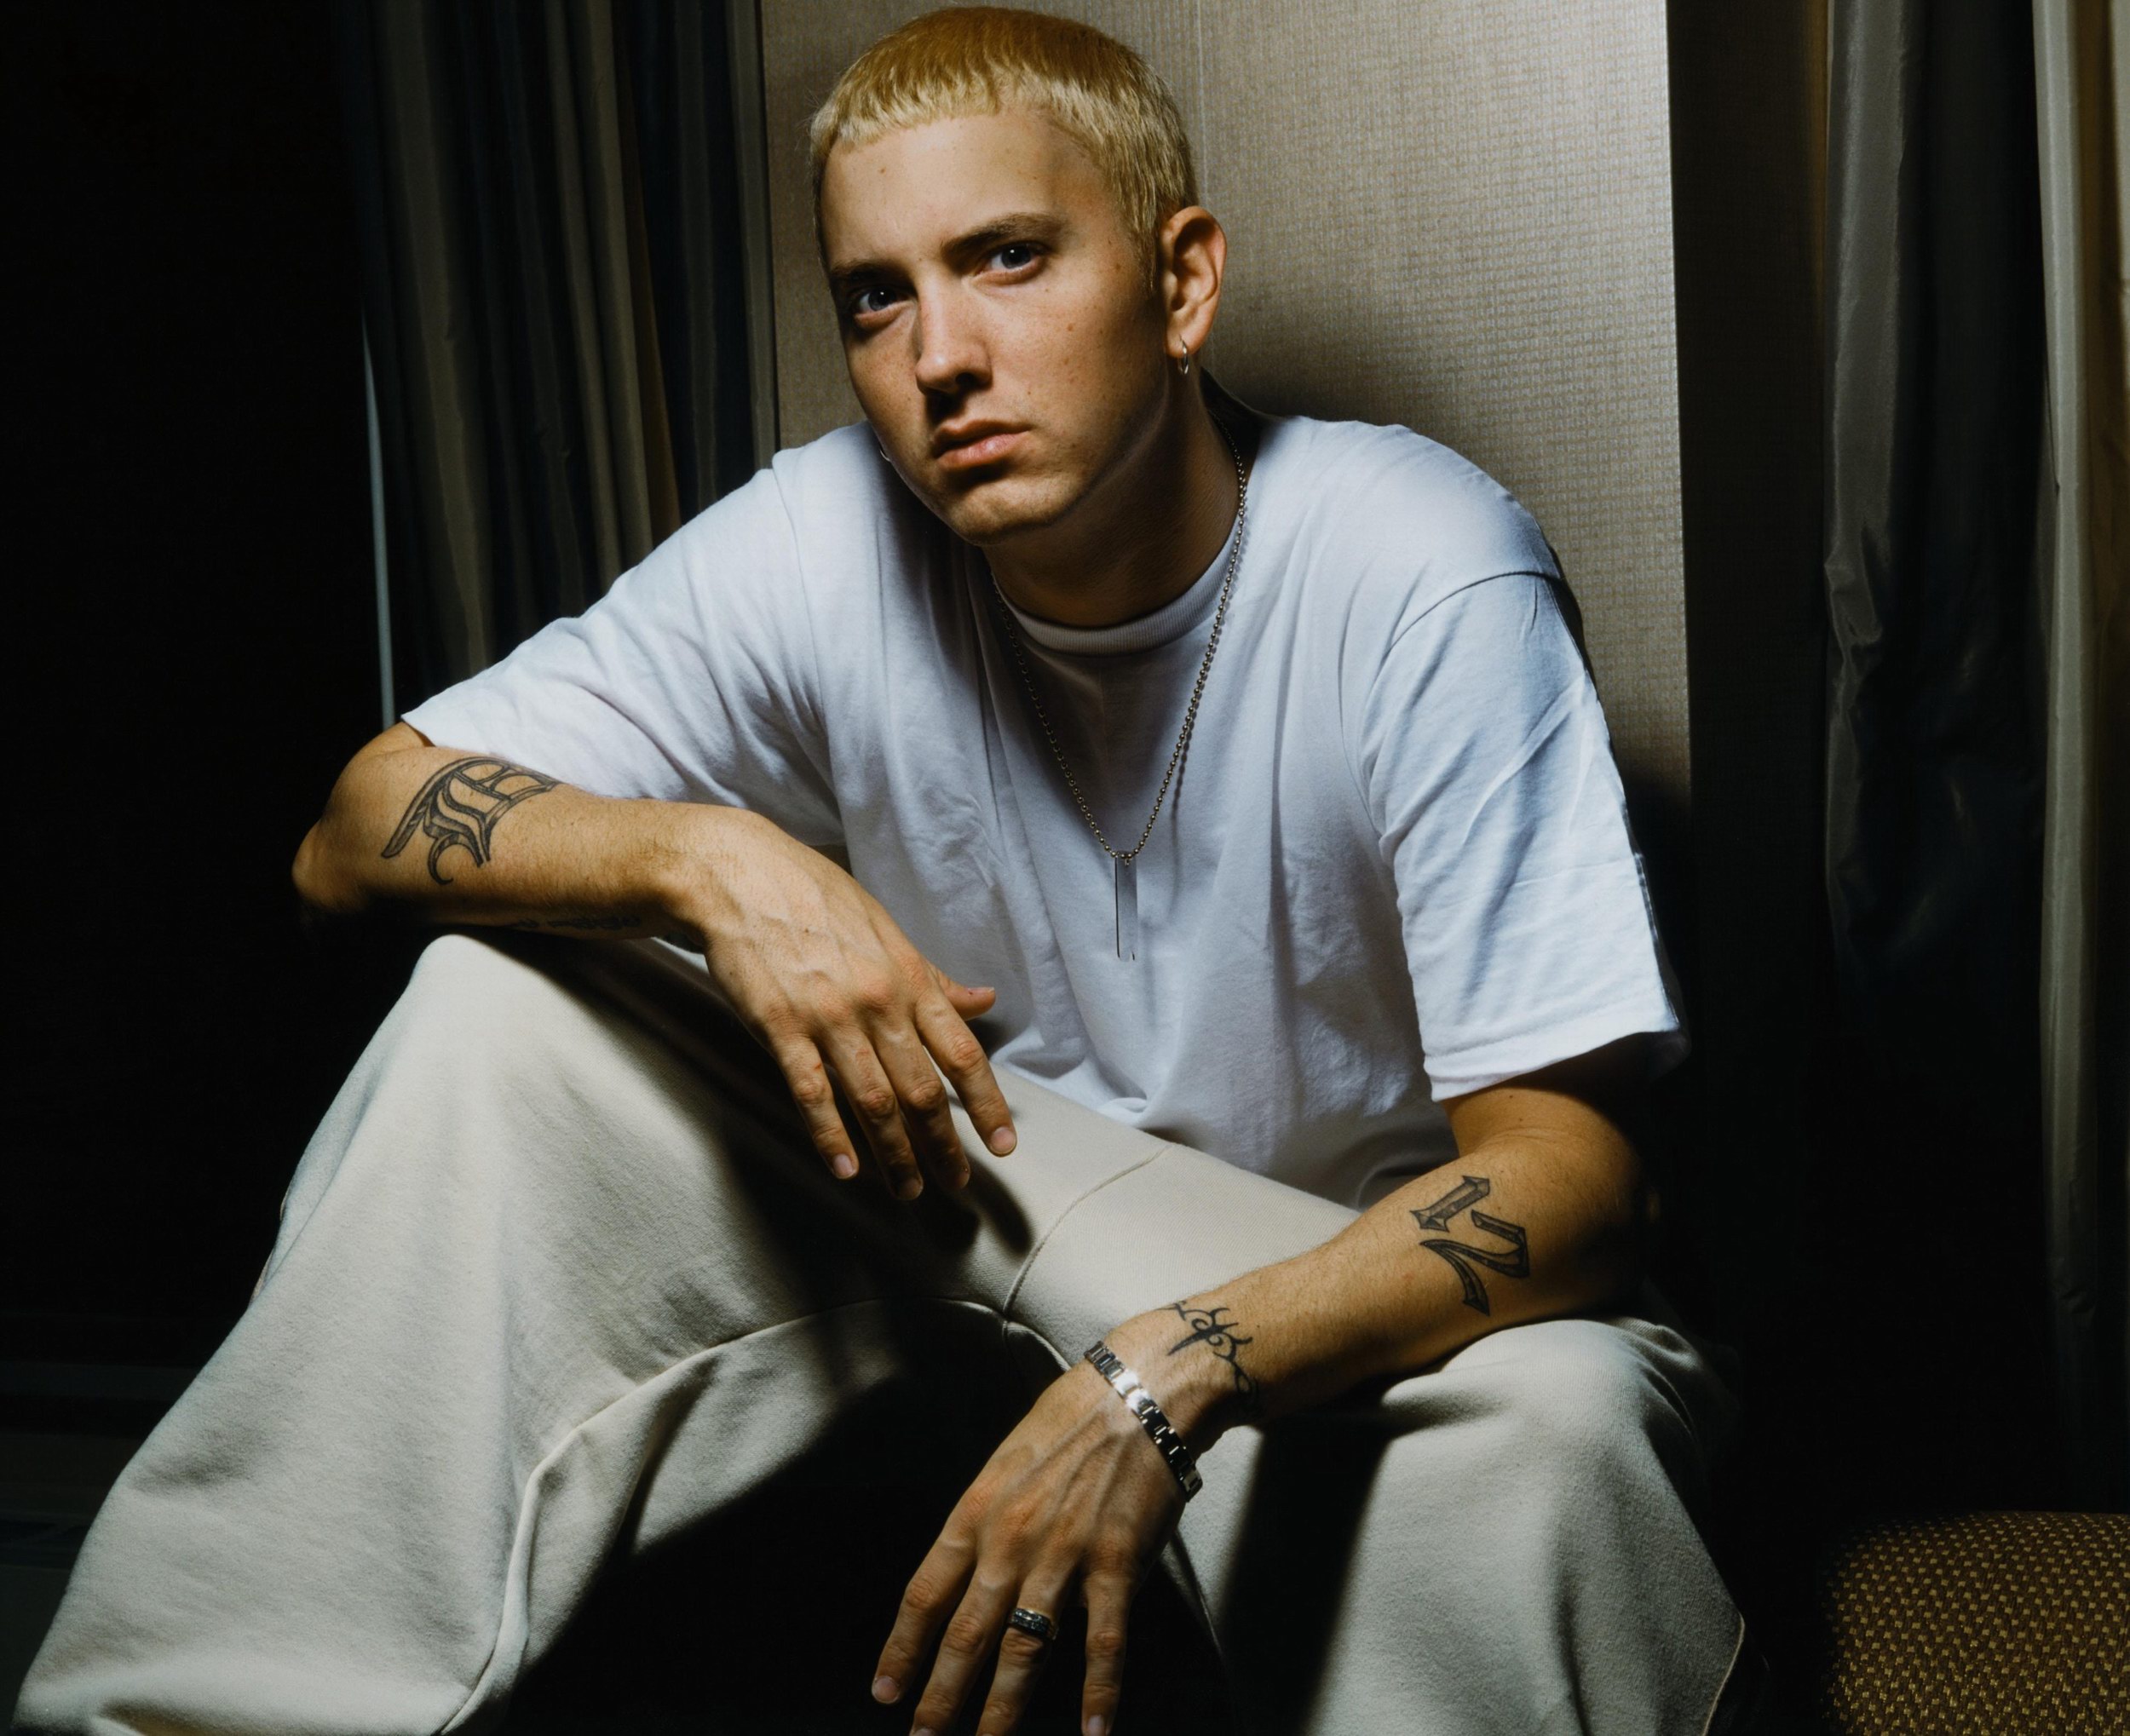 Eminem Isn’t “Gaunt and Haggard,” He’s Fit and Healthy2500 x 2038